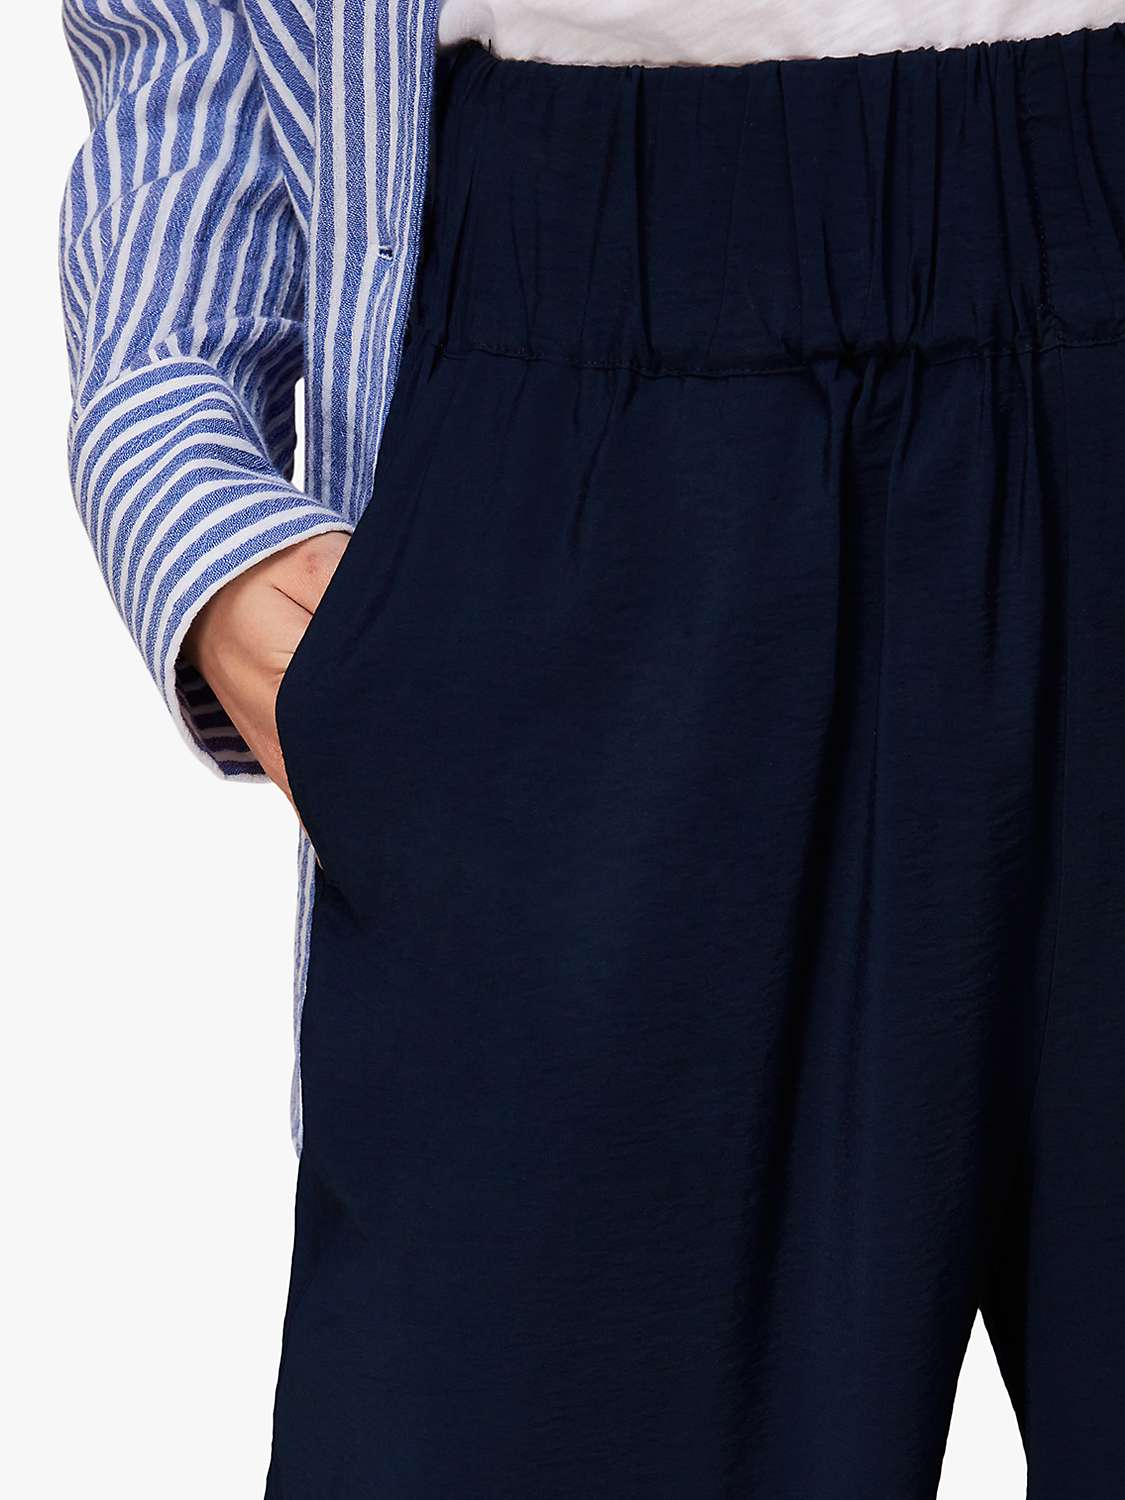 Buy Whistles Nicola Elasticated Trousers Online at johnlewis.com